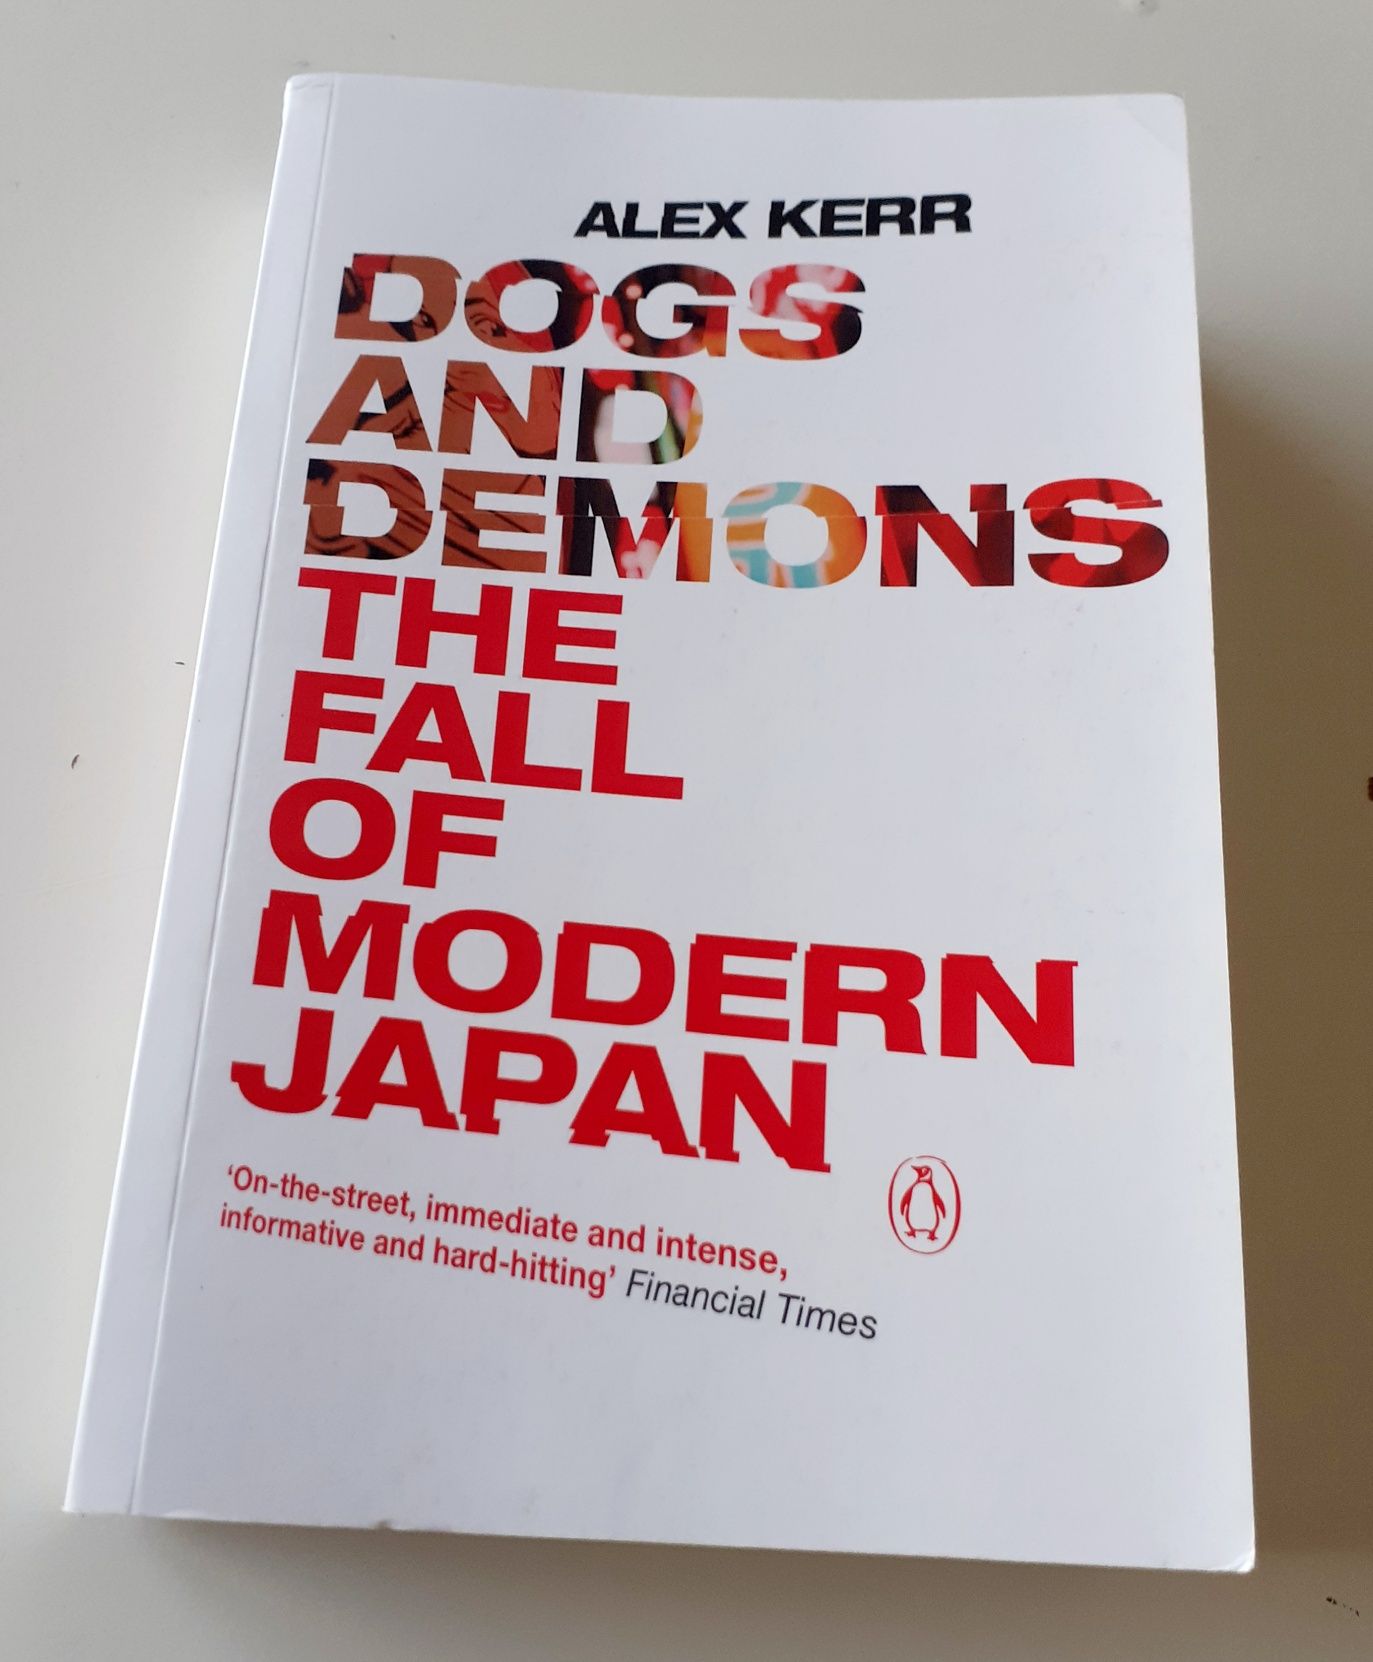 Alex Kerr - Dogs and Demons, the fall of modern Japan